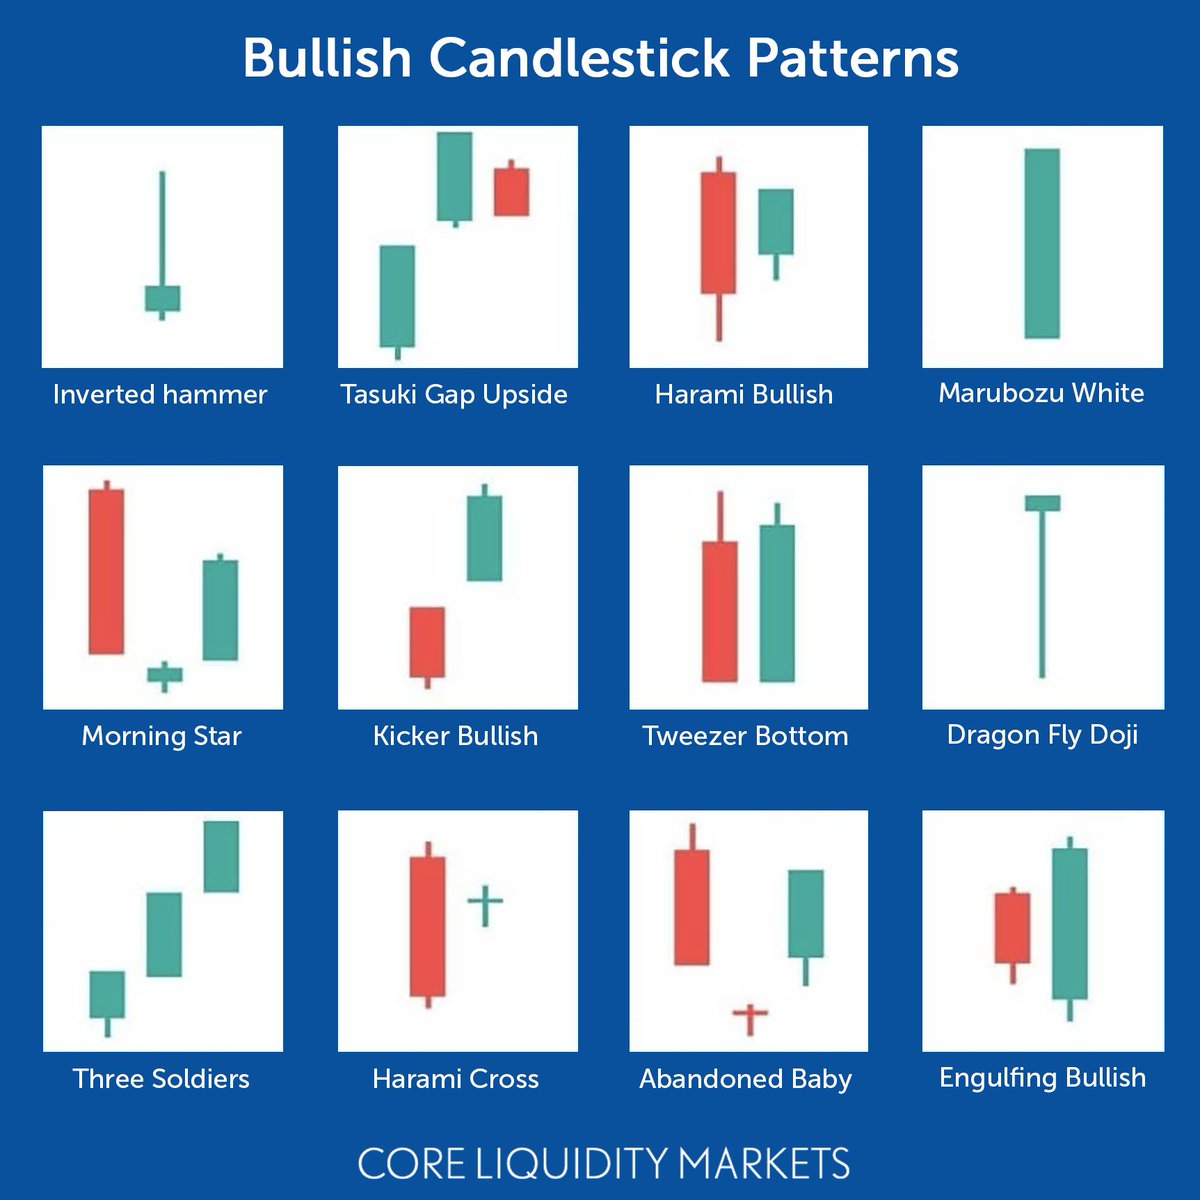 12 of the most common bullish candlestick patterns